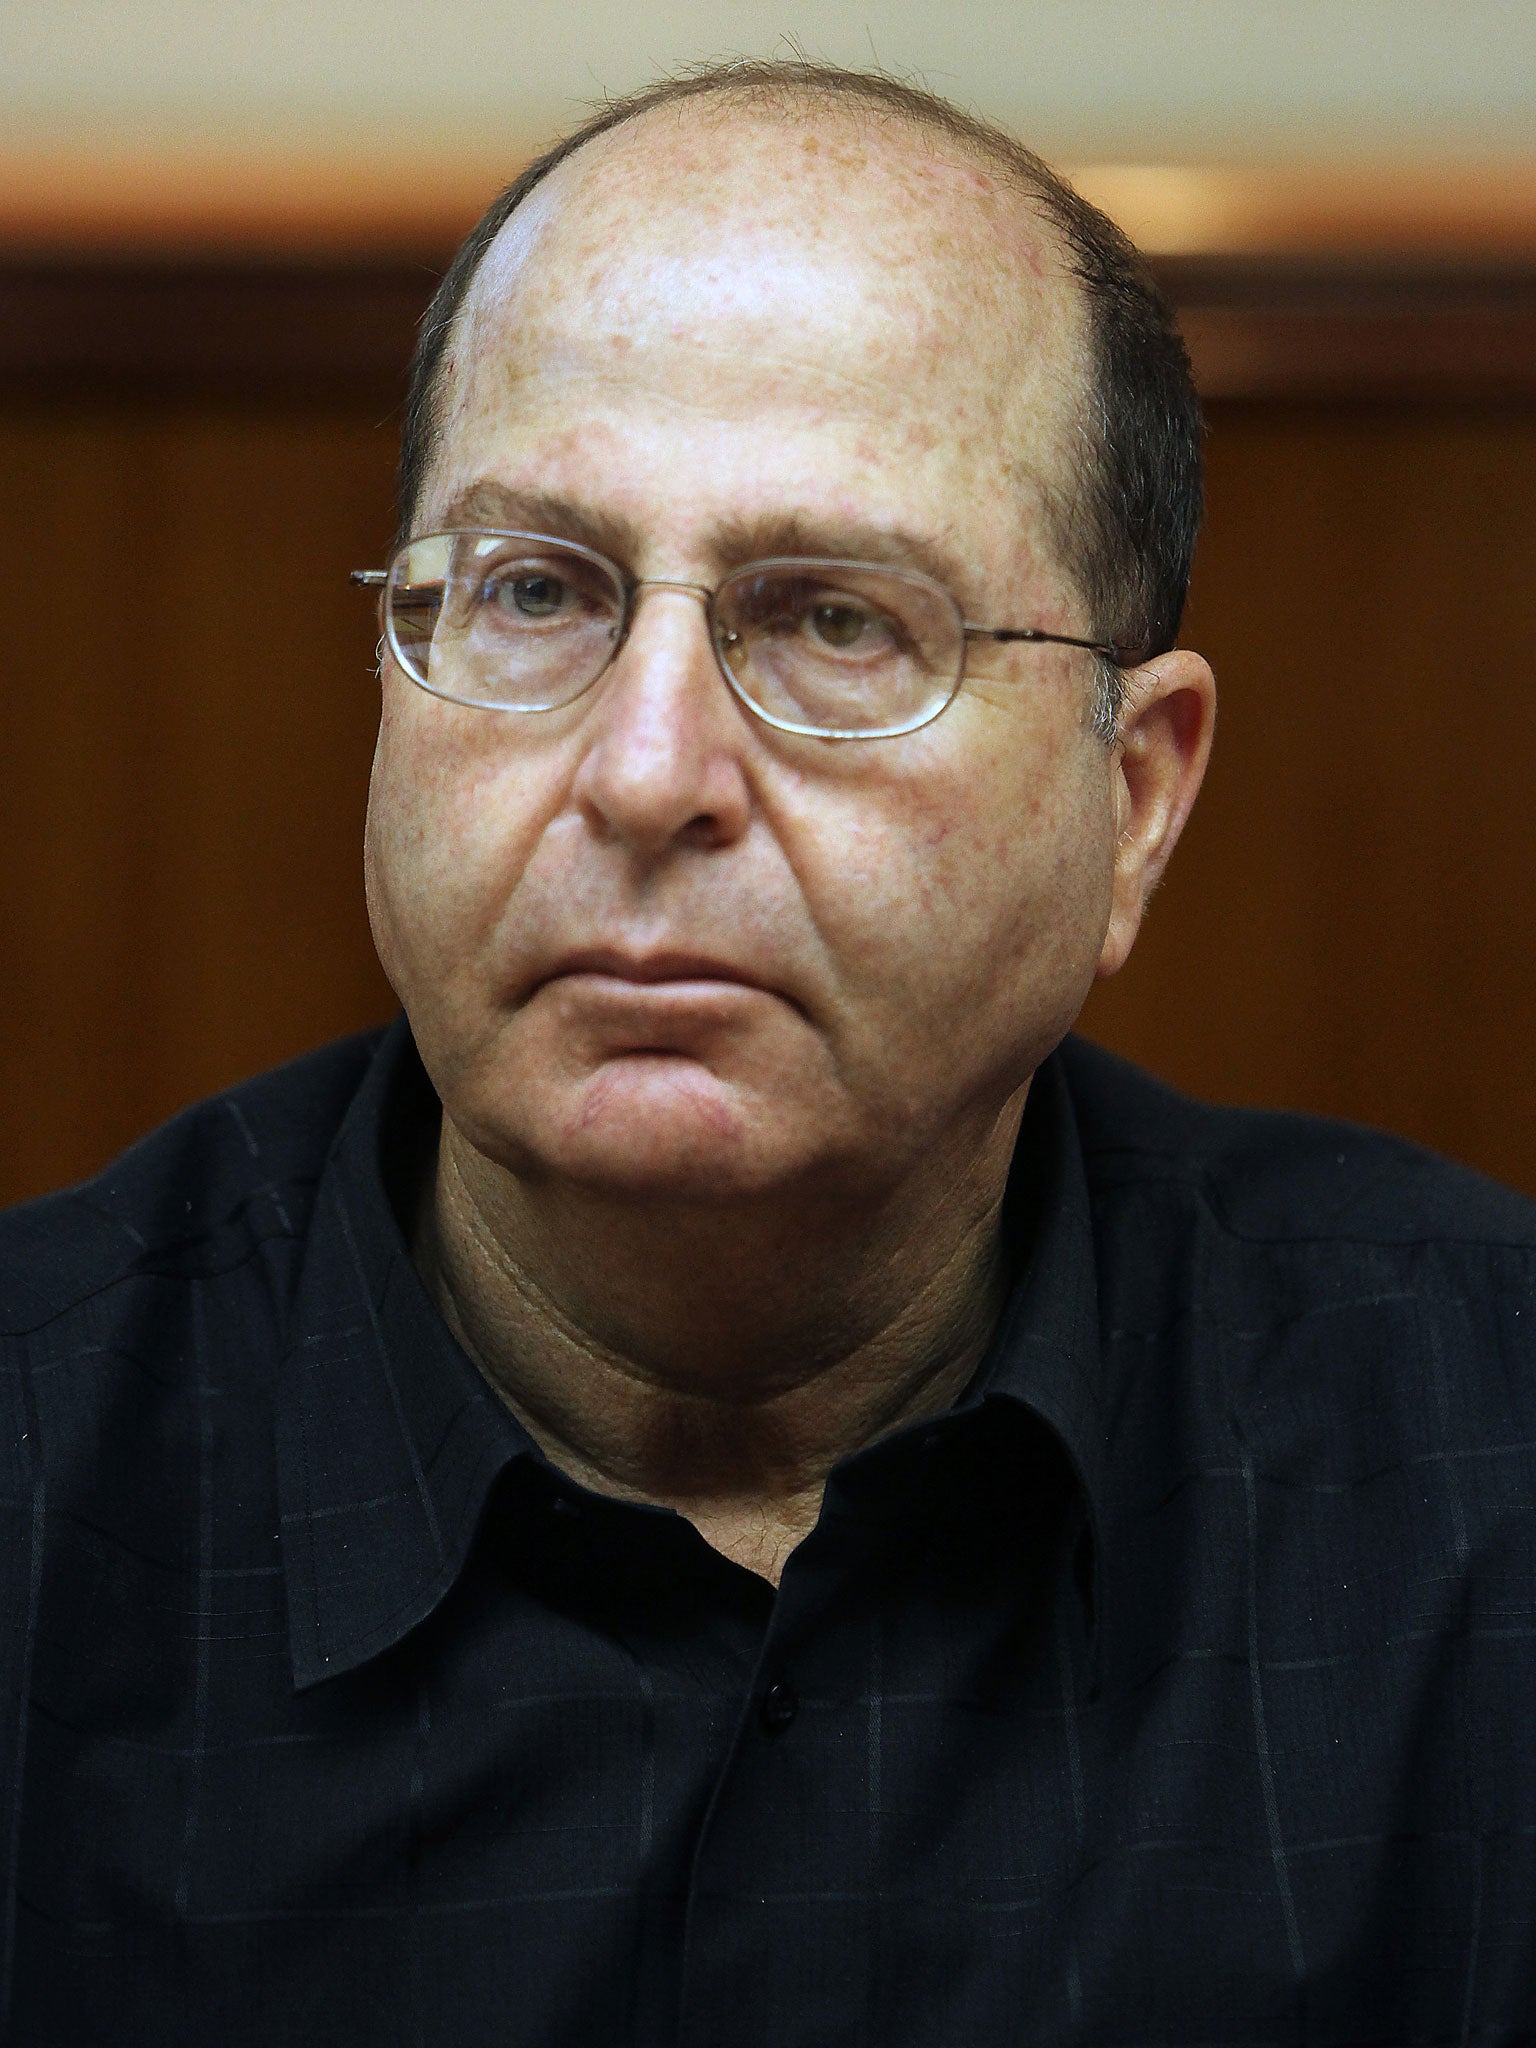 'The discovery of the tunnel… prevented attempts to harm Israeli civilians who live close to the border and military forces in the area,' said the Israeli Defence Minister, Moshe Yaalon